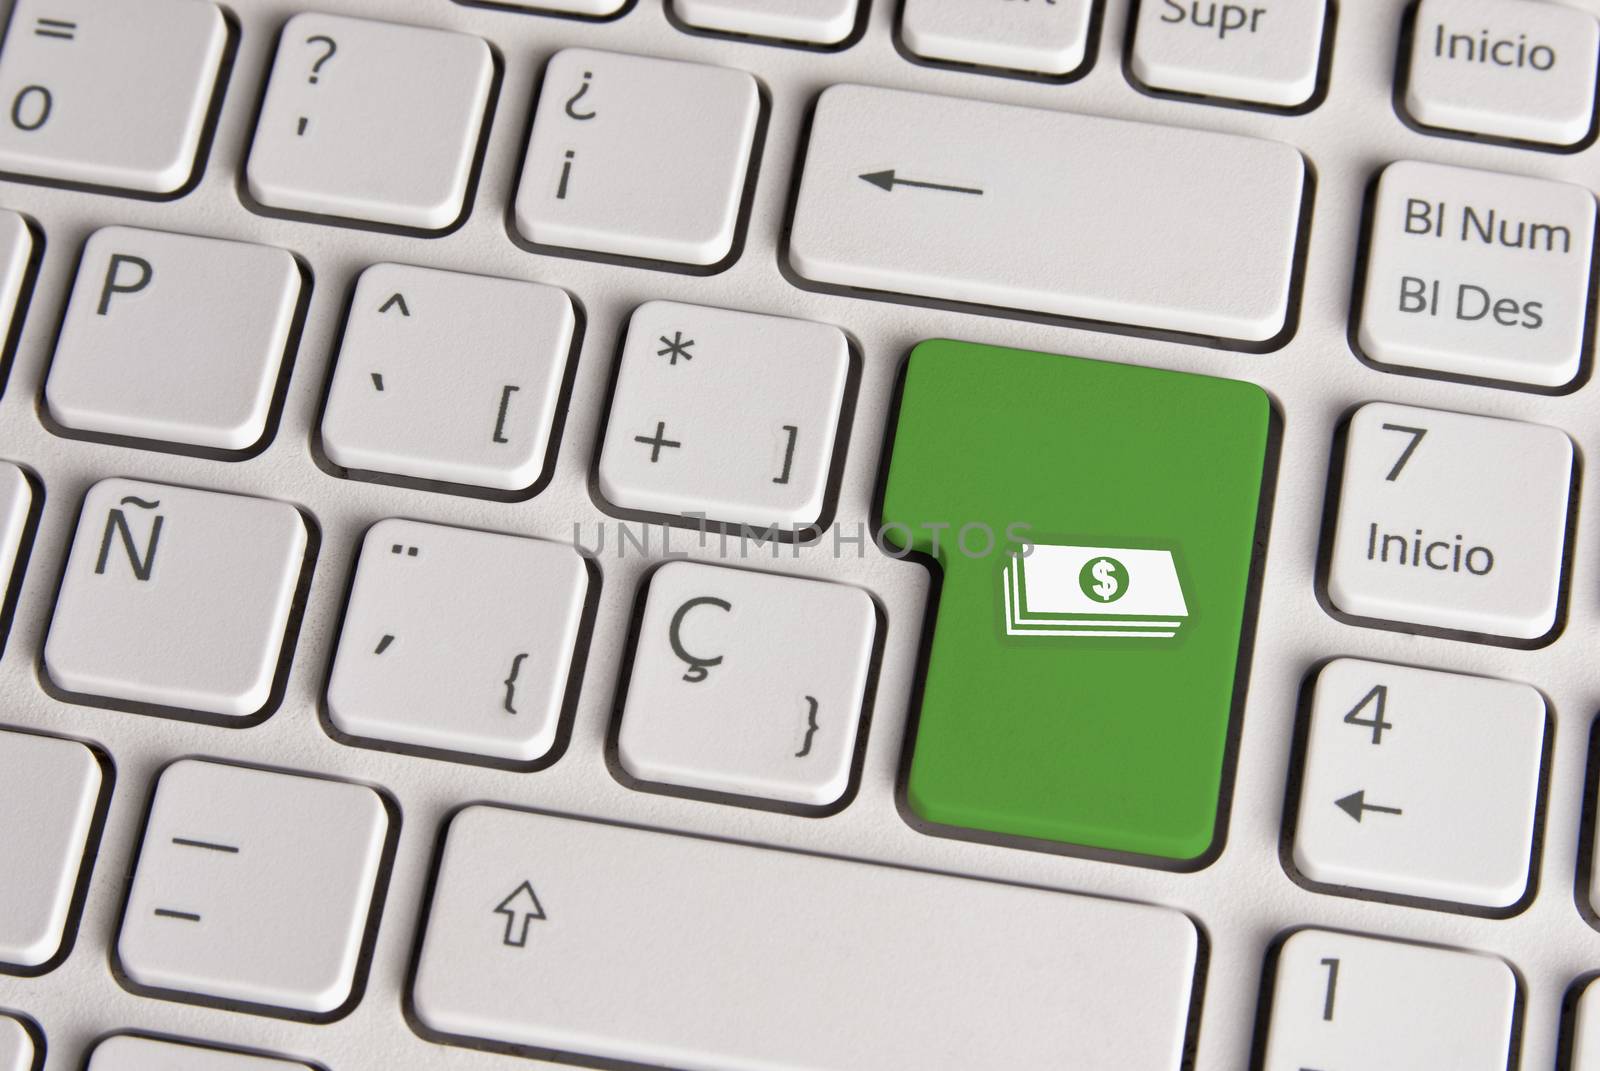 Spanish keyboard with money cash icon over green background button. Image with clipping path for easy change the key color and editing.